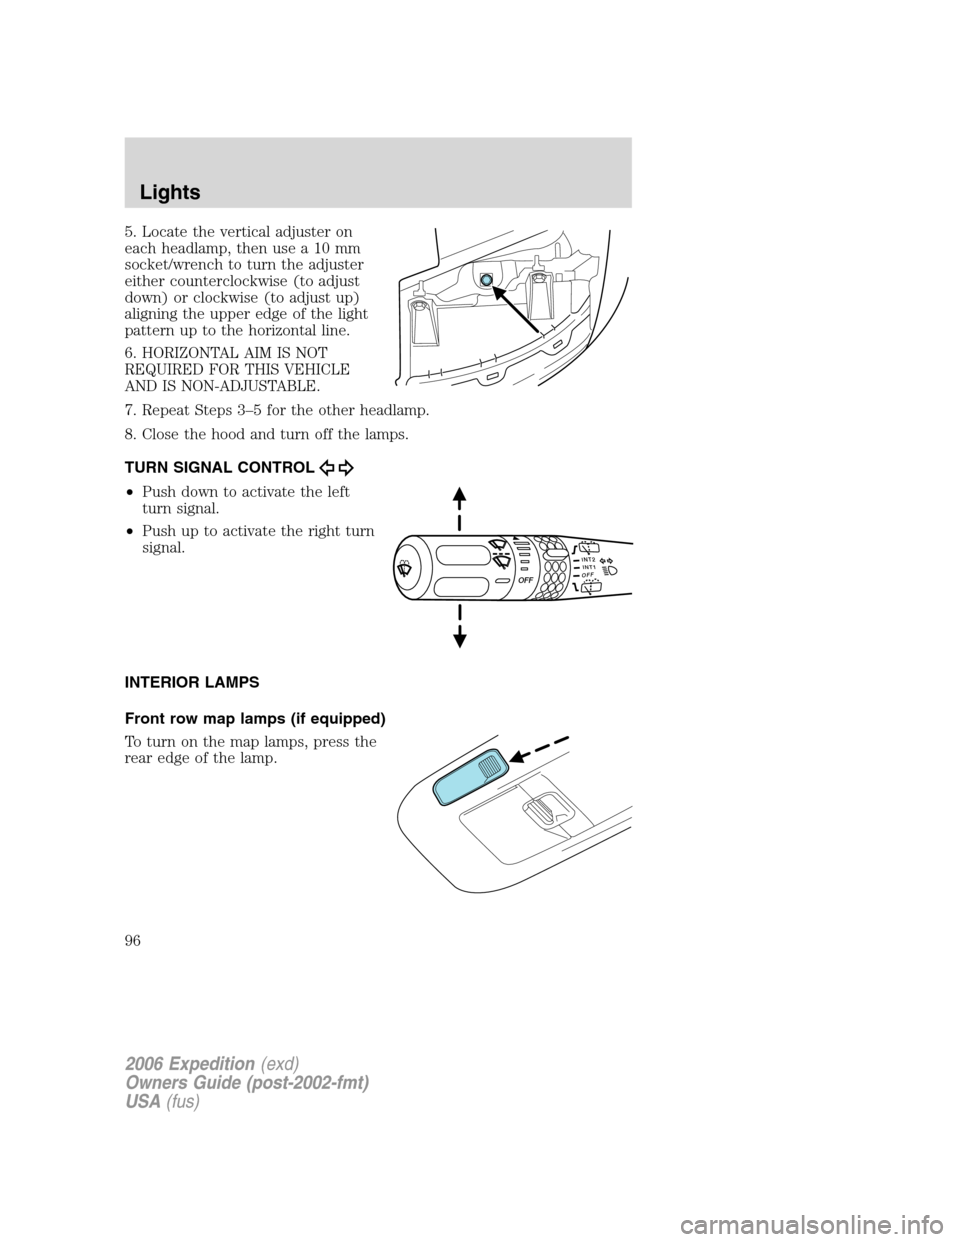 FORD EXPEDITION 2006 2.G Owners Manual 5. Locate the vertical adjuster on
each headlamp, then use a 10 mm
socket/wrench to turn the adjuster
either counterclockwise (to adjust
down) or clockwise (to adjust up)
aligning the upper edge of th